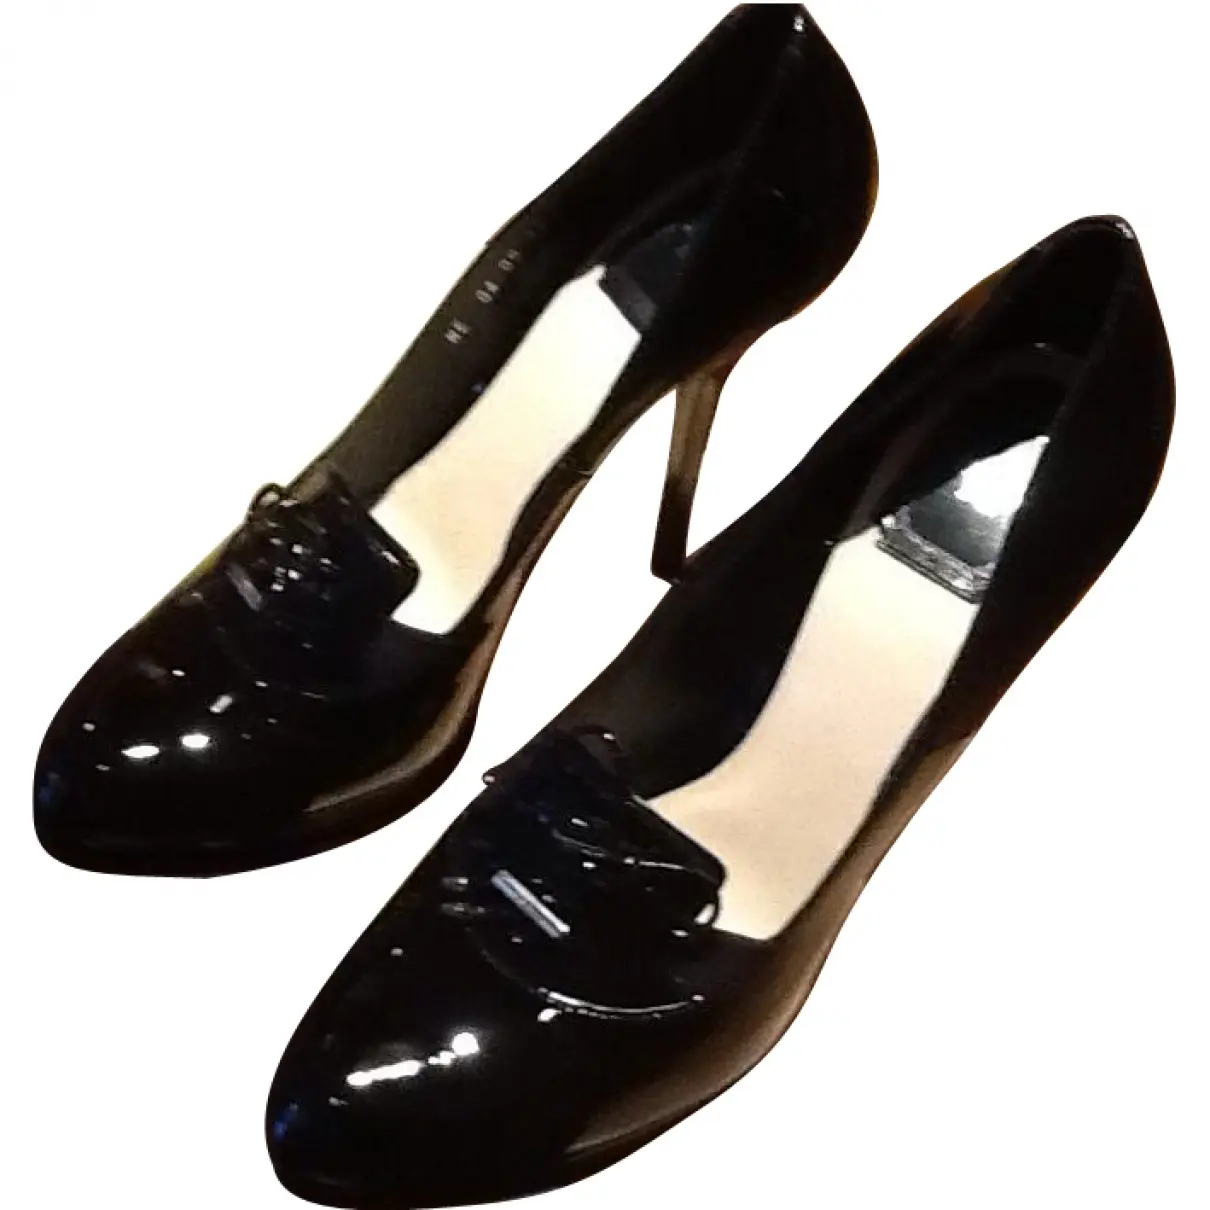 Buy Christian Dior Black Patent leather Heels online